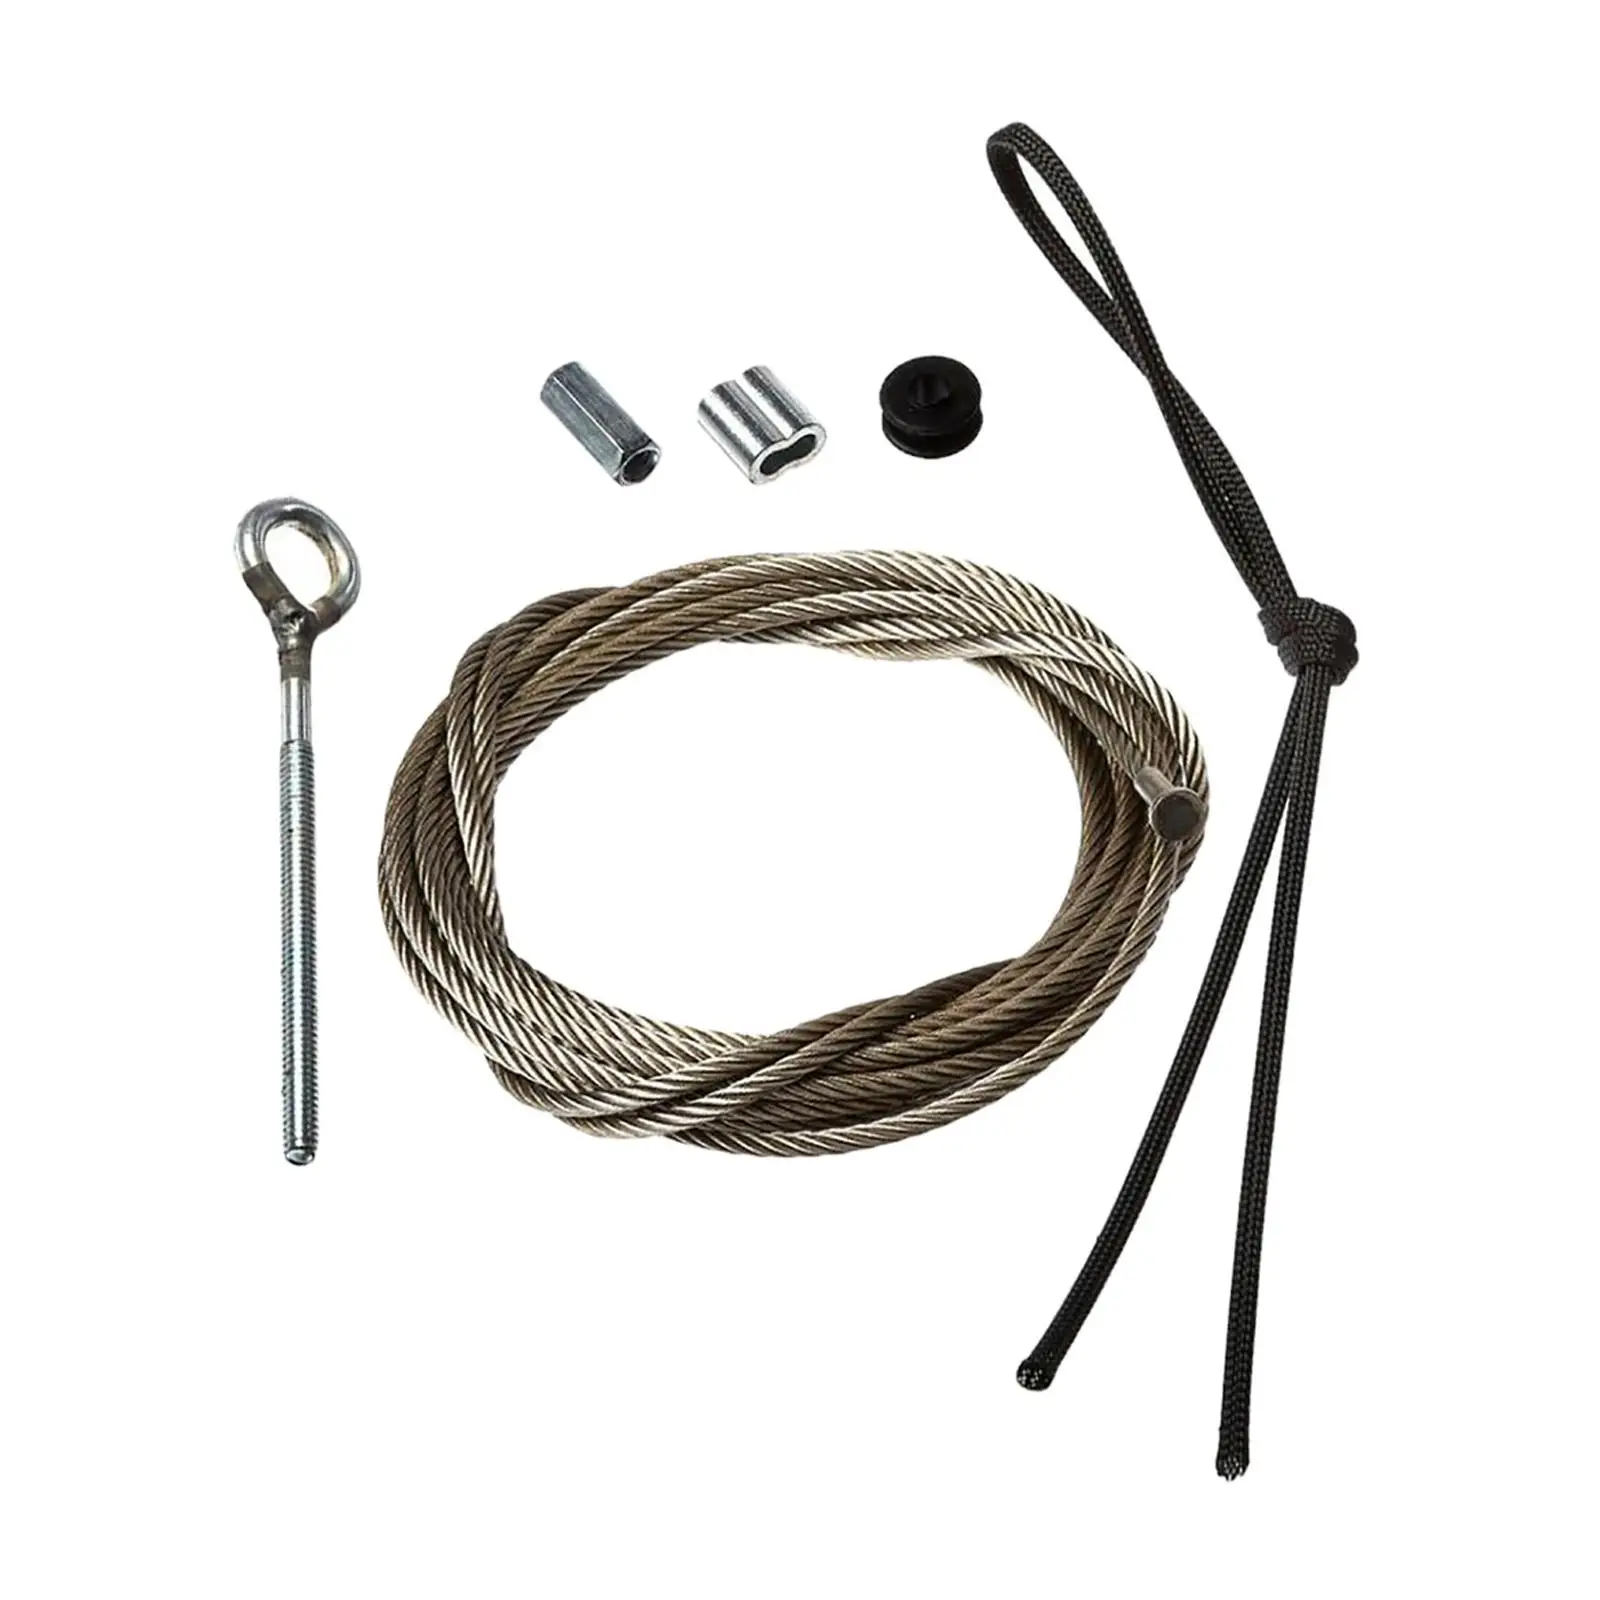 22305 Cable Repair Kit  Stay Wire Set Accessories for Fifth Wheels